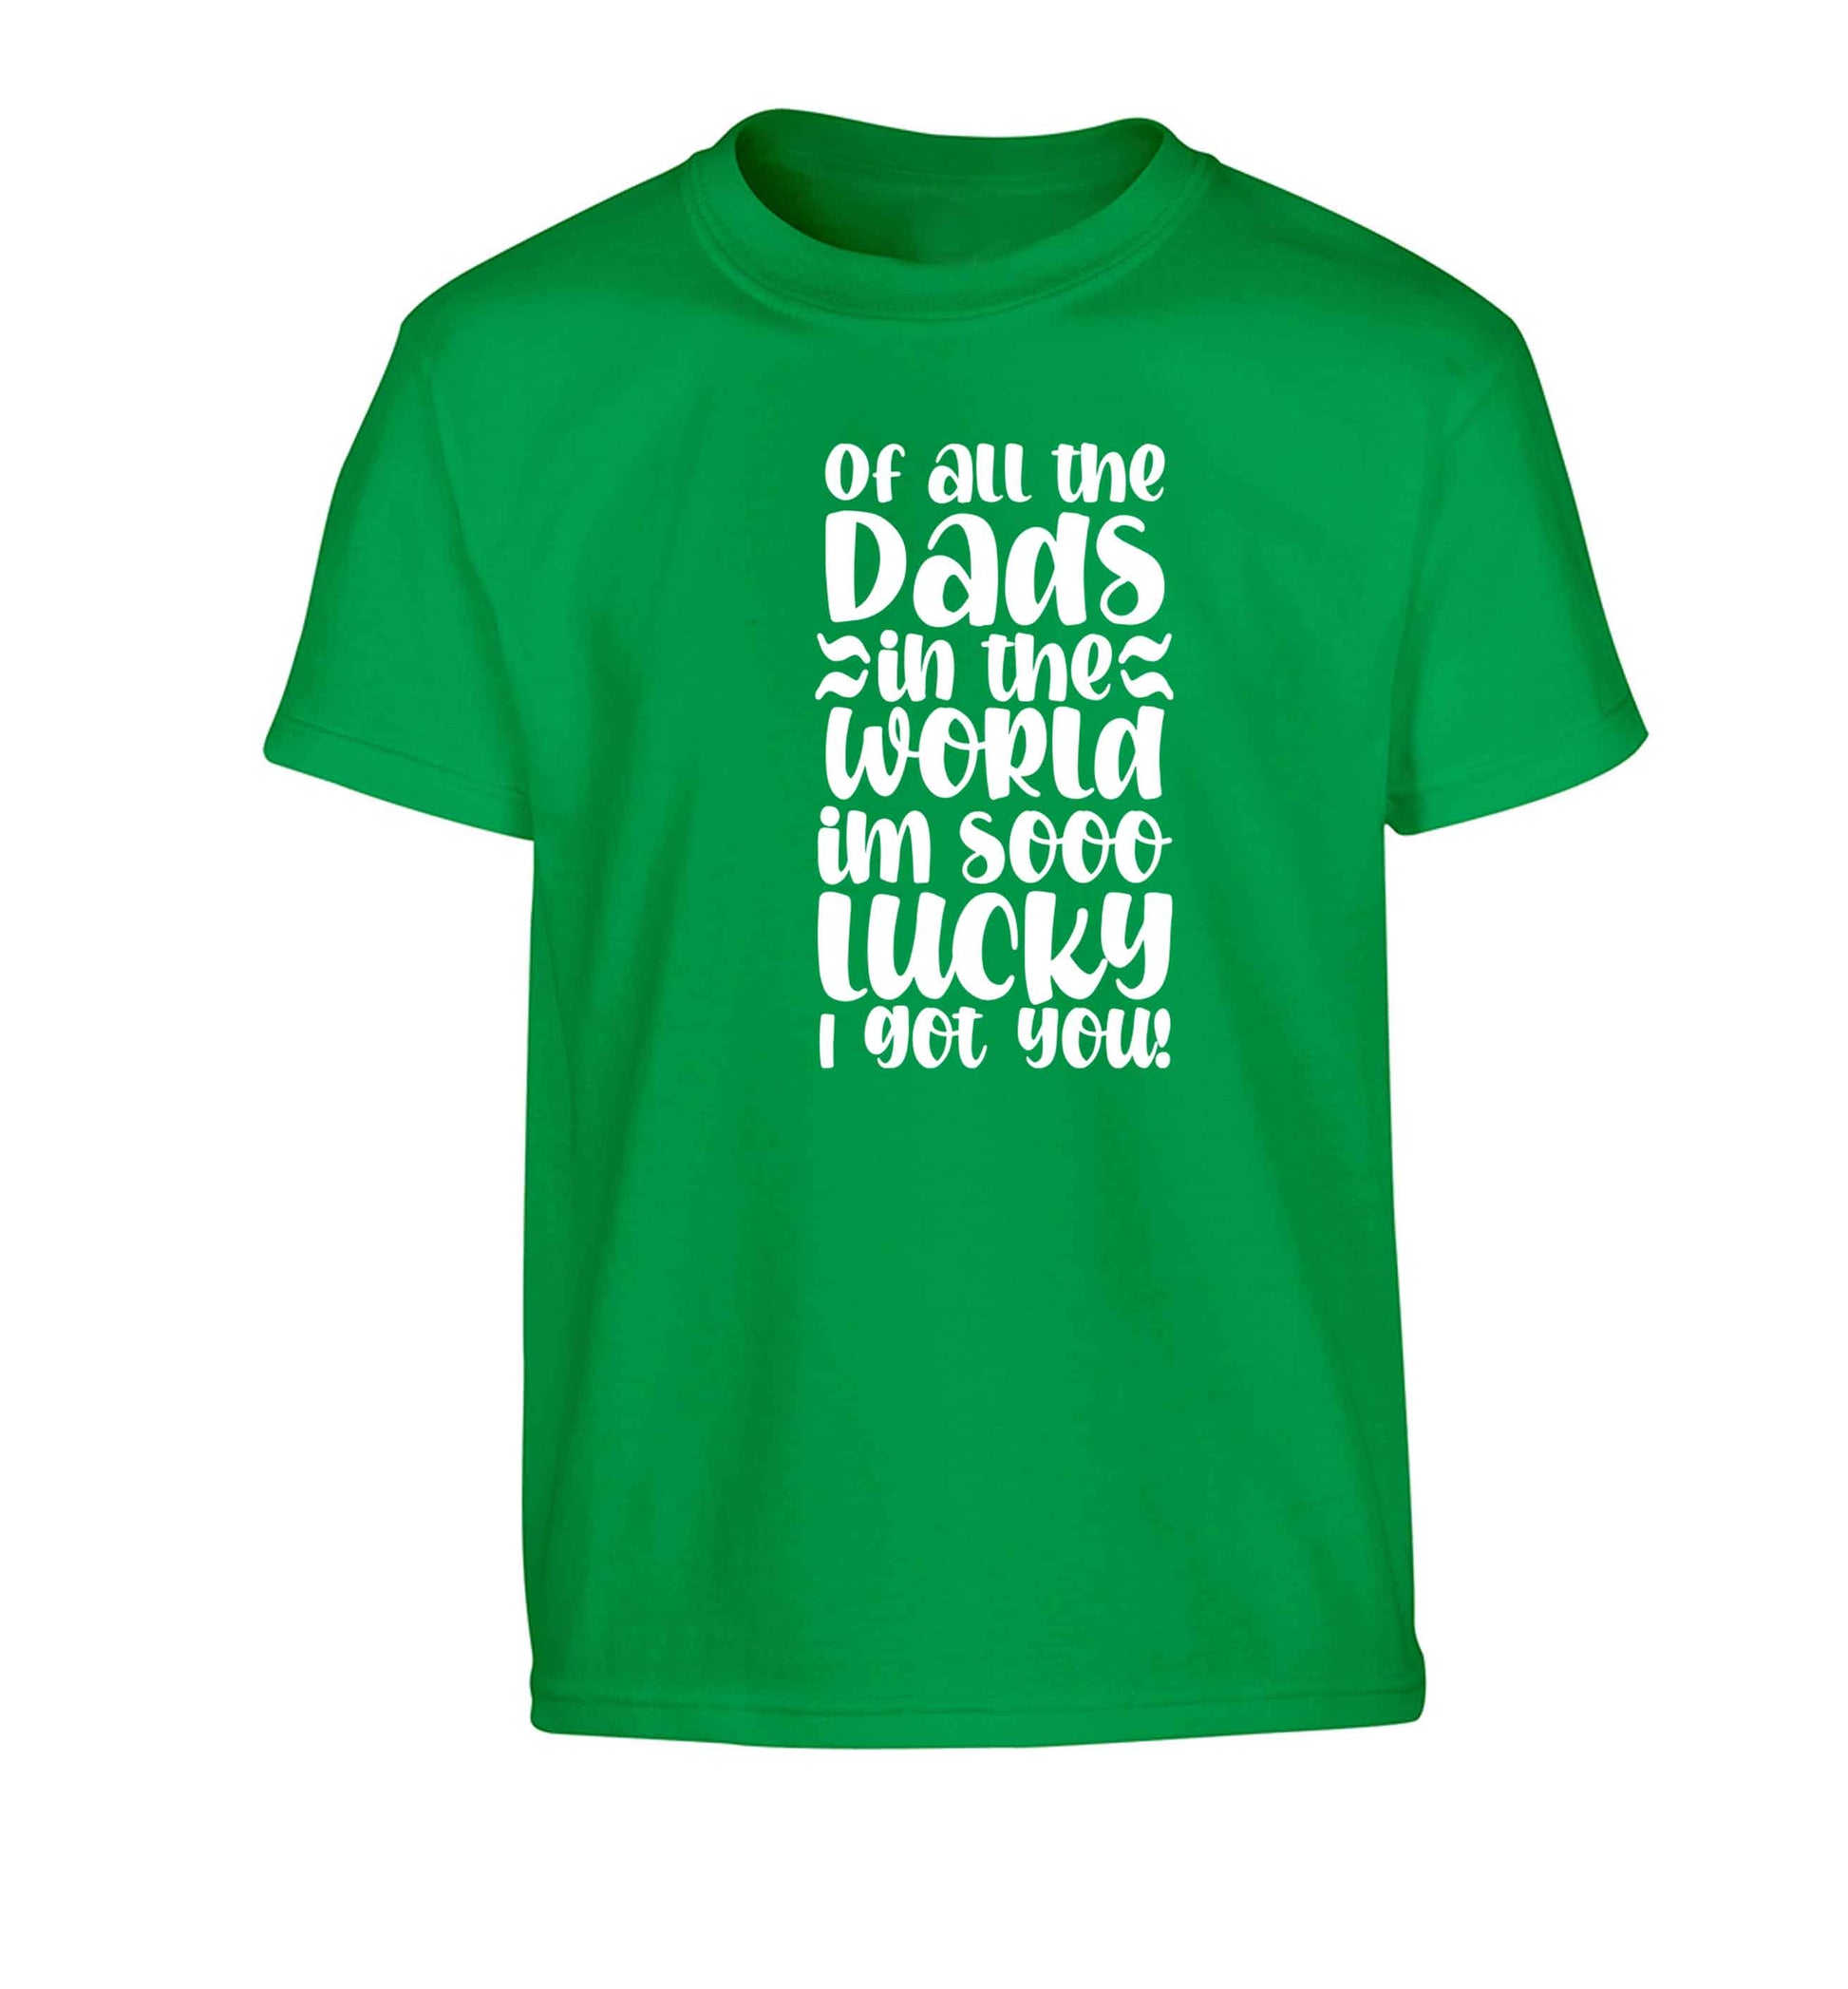 Of all the Dads in the world I'm so lucky I got you Children's green Tshirt 12-13 Years